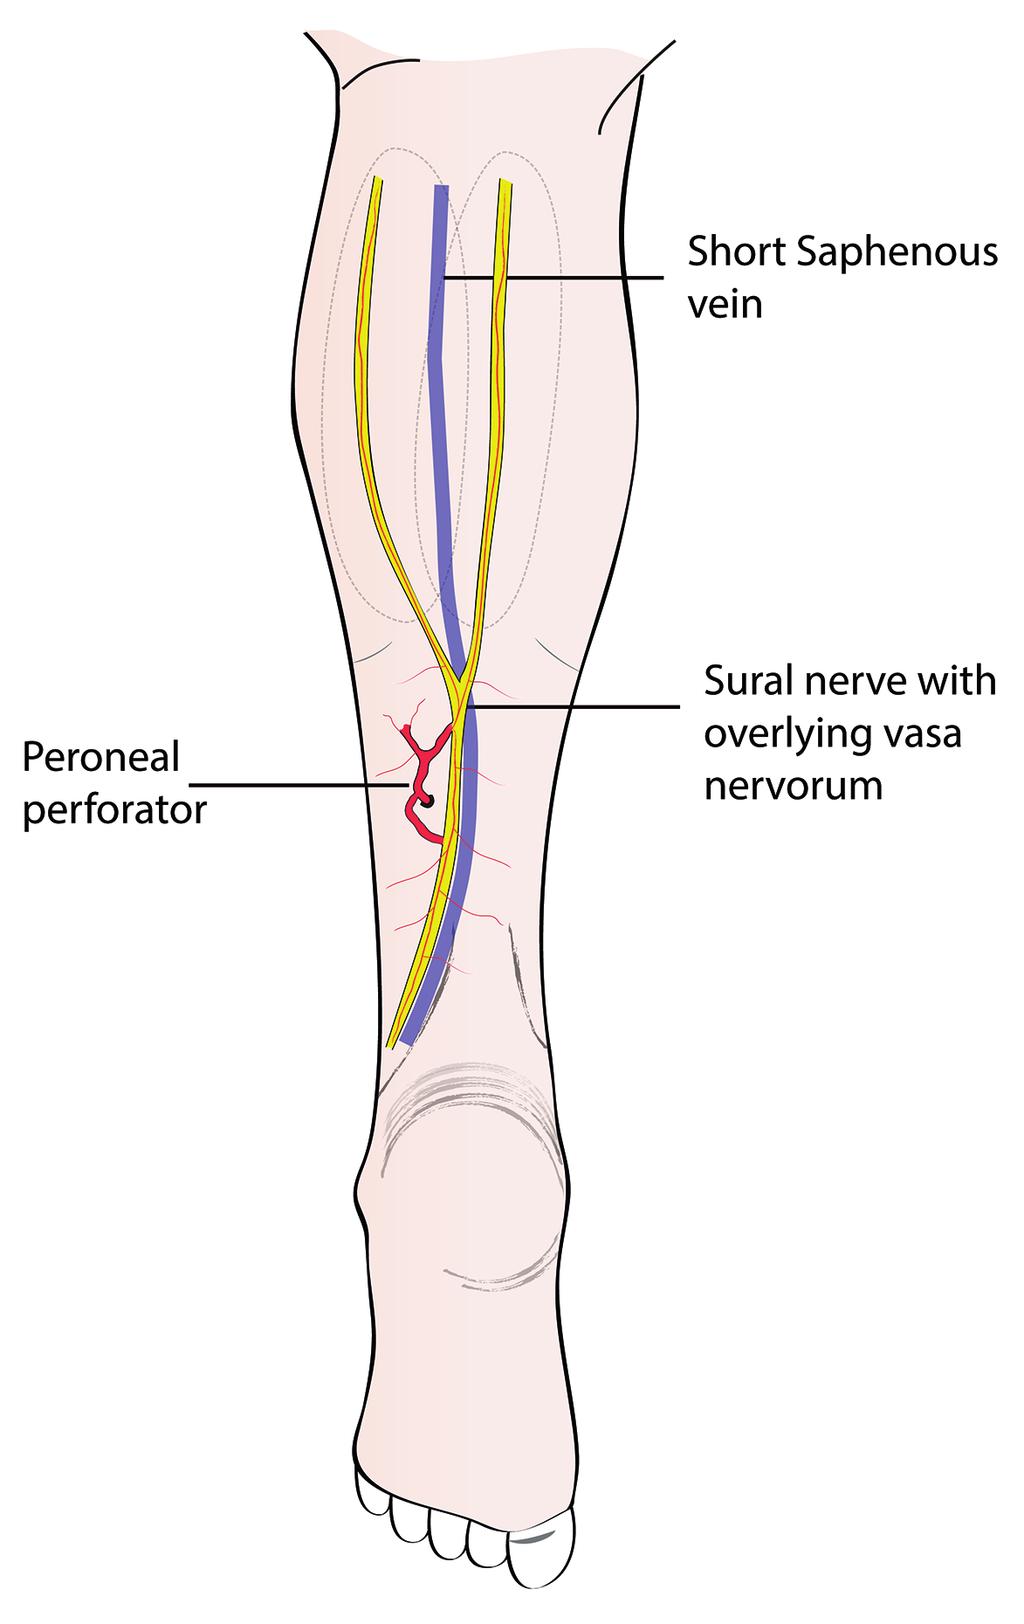 The short saphenous vein ran in the subcutaneous plane following the posterior midline of the leg and pierced the muscle fascia in the upper third of the leg to join with the popliteal vein (Fig. 3).